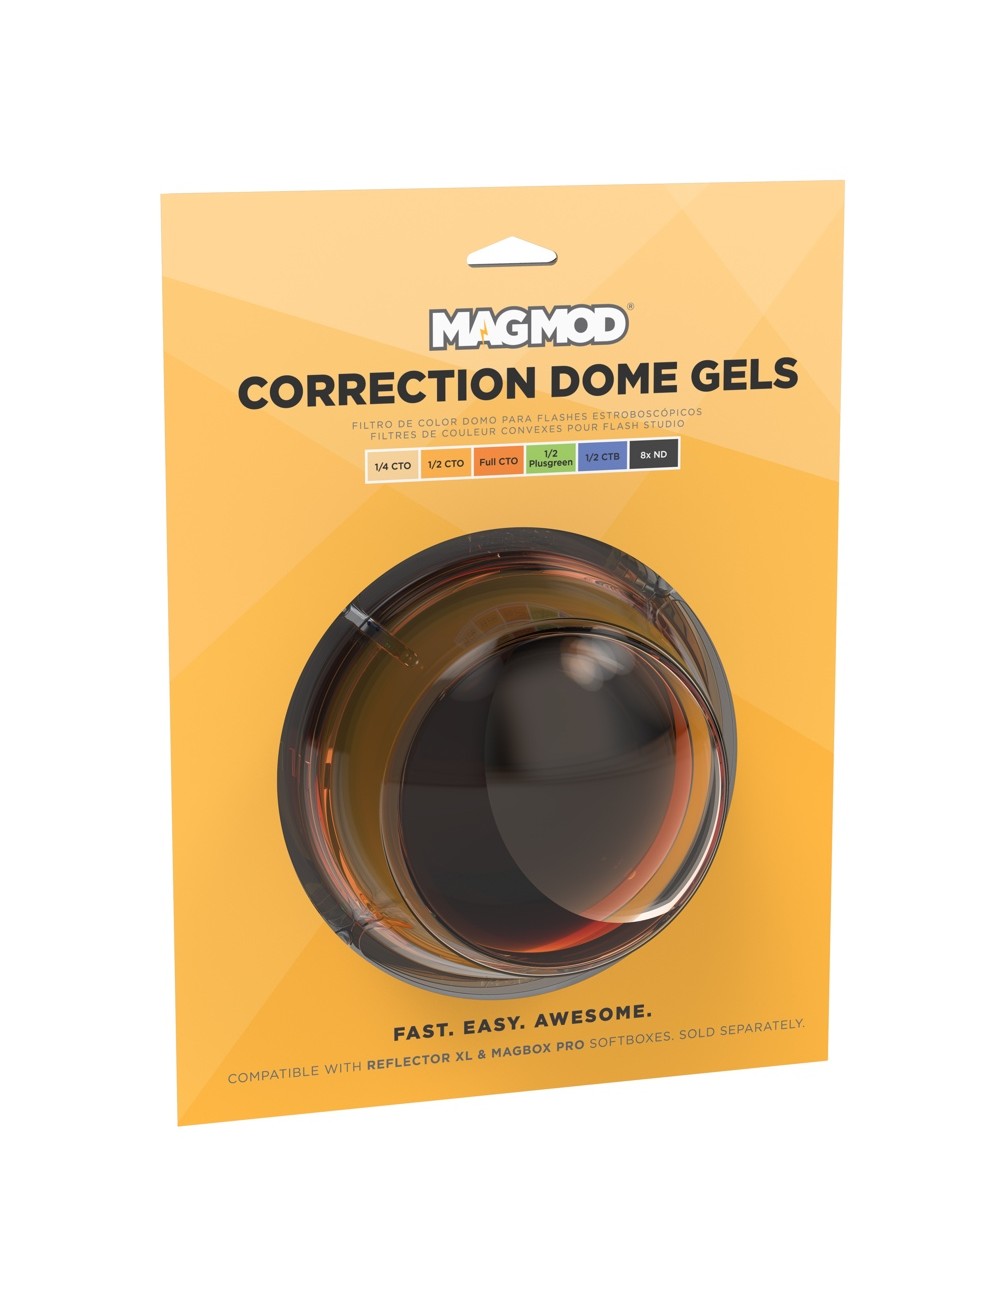 MAGMOD XL - Correction Dome Gels